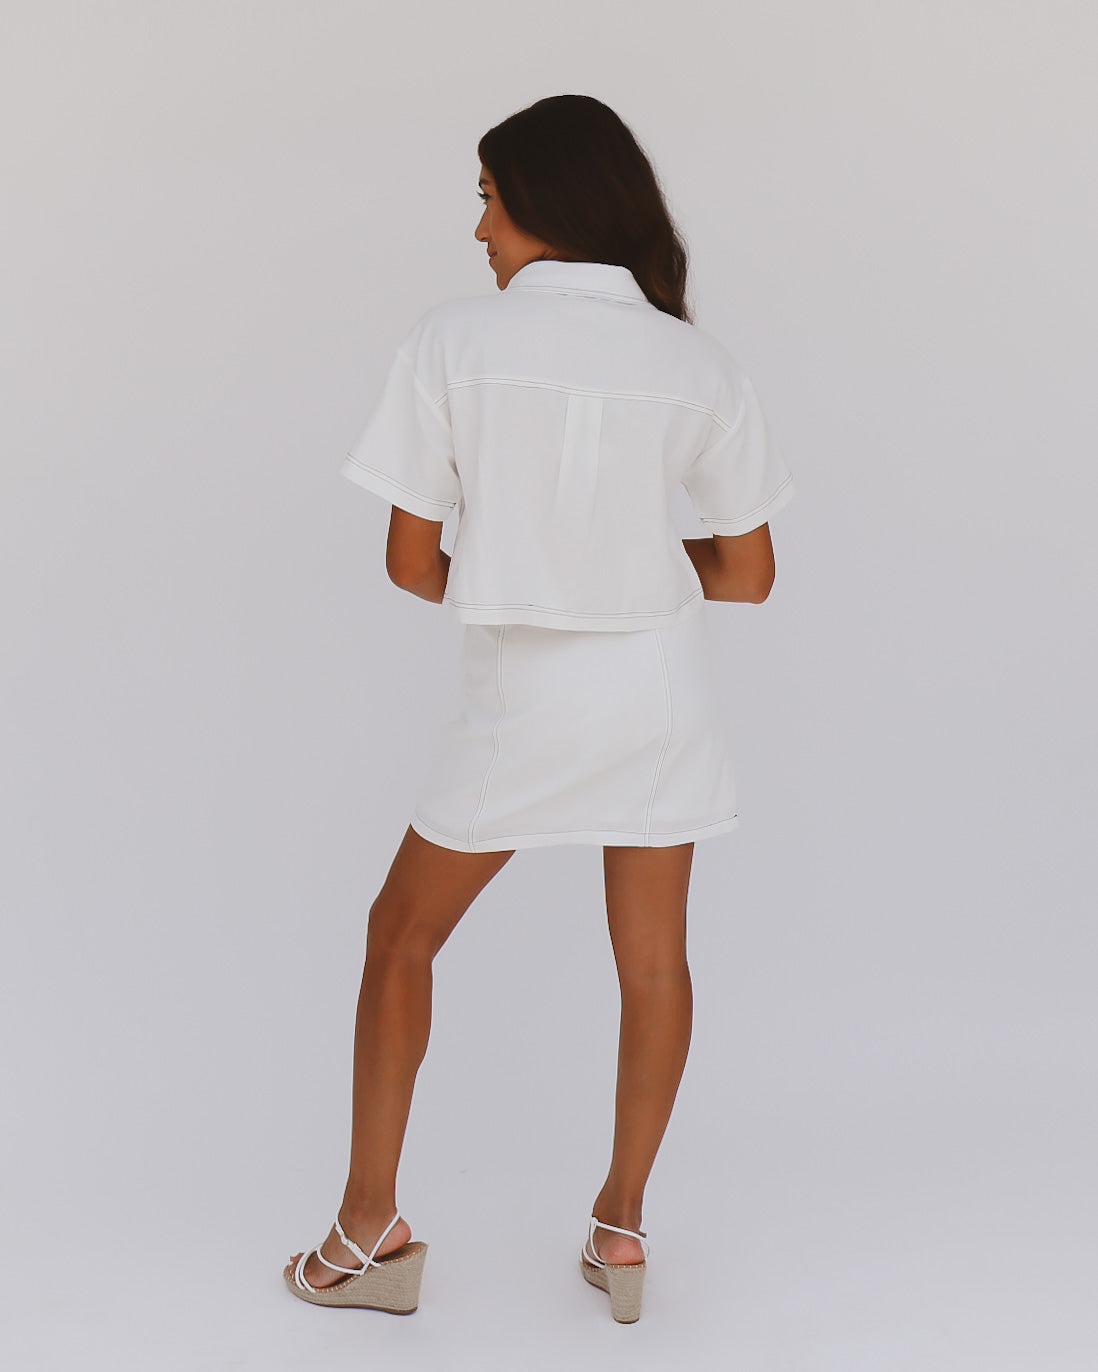 Thea Skirt in White